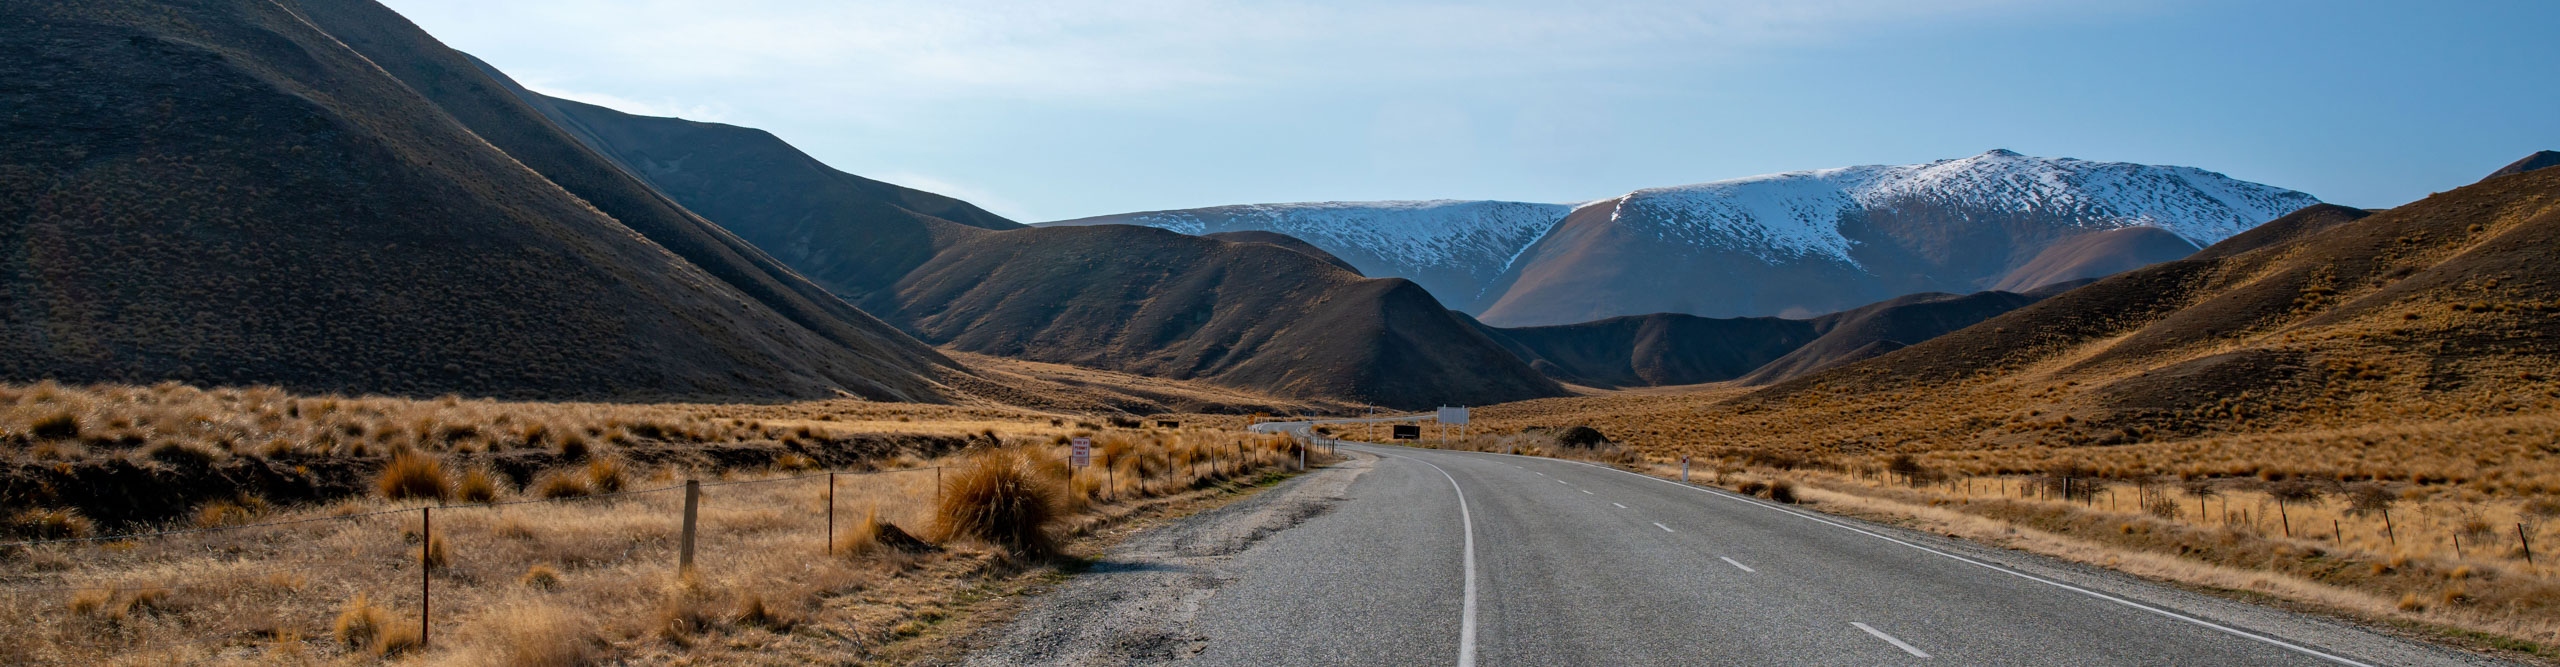 Road from Queenstown to Wanaka on the south island, New Zealand